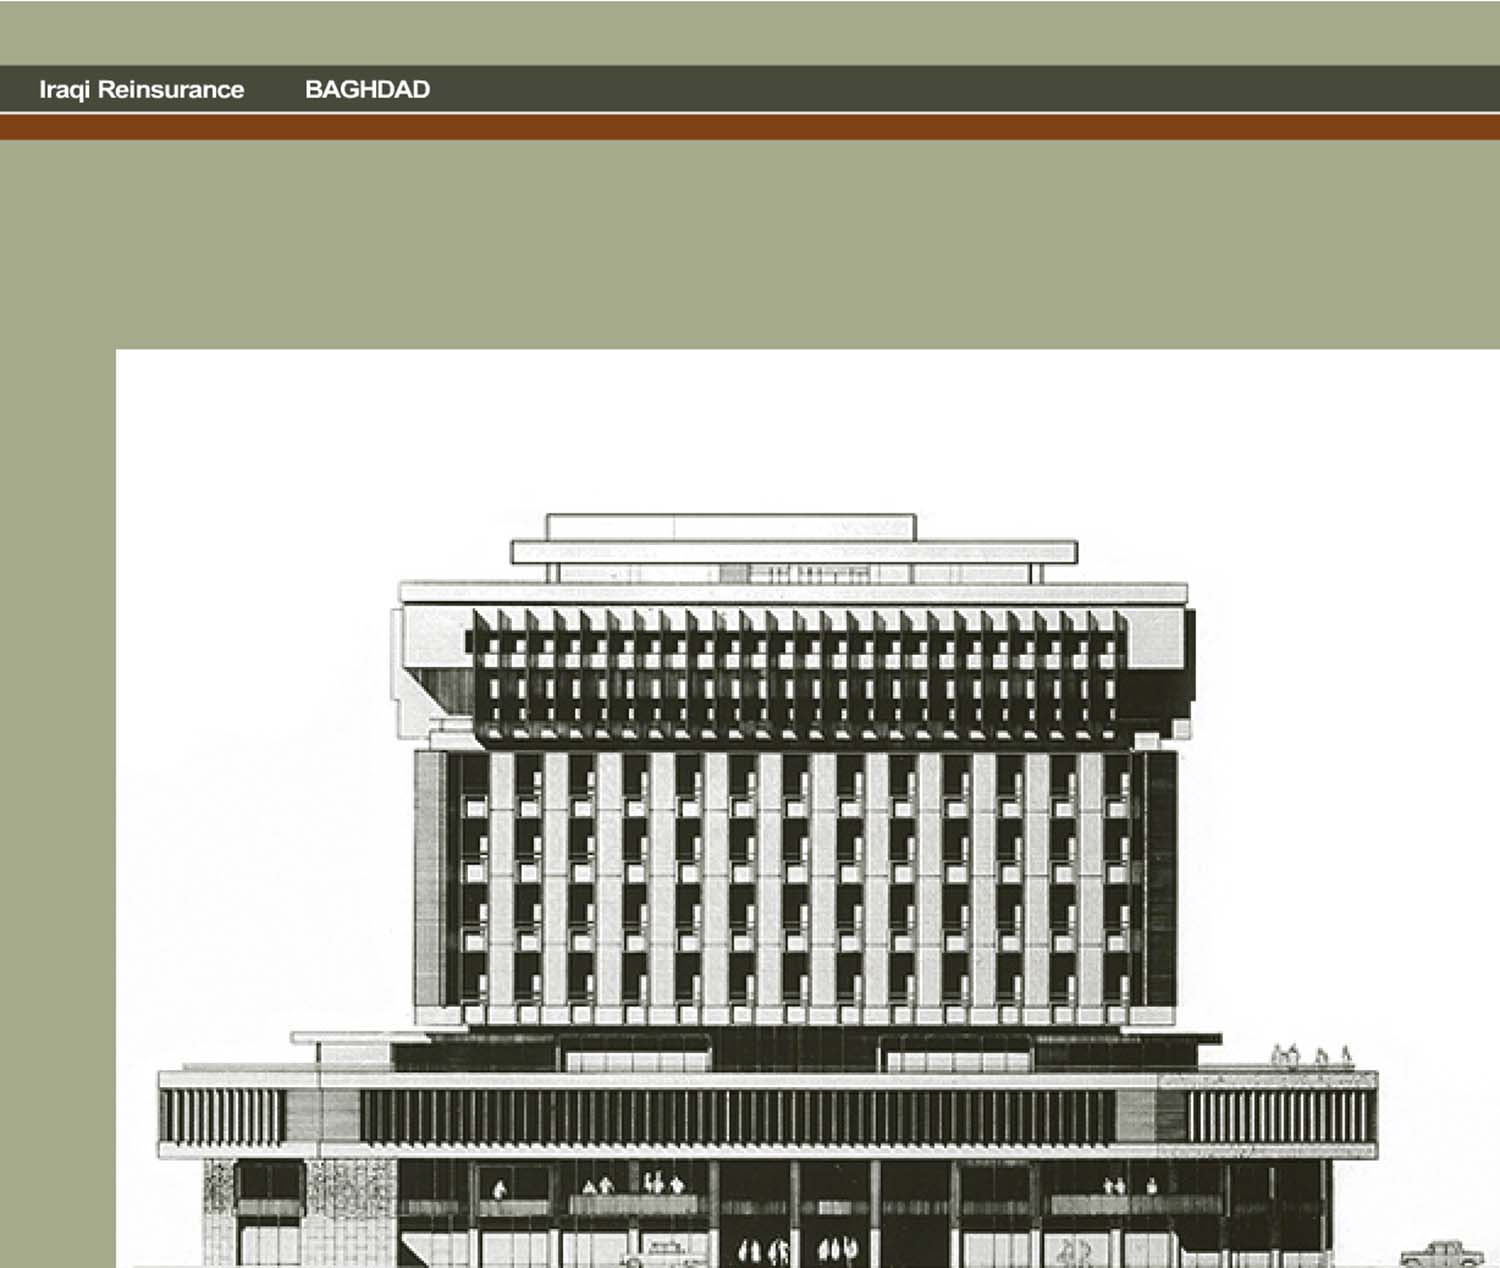 Digital image showing the architectural drawing of the 1965 Iraqi Reinsurance building's elevation from the online project portfolio of Hisham Munir and Associates.